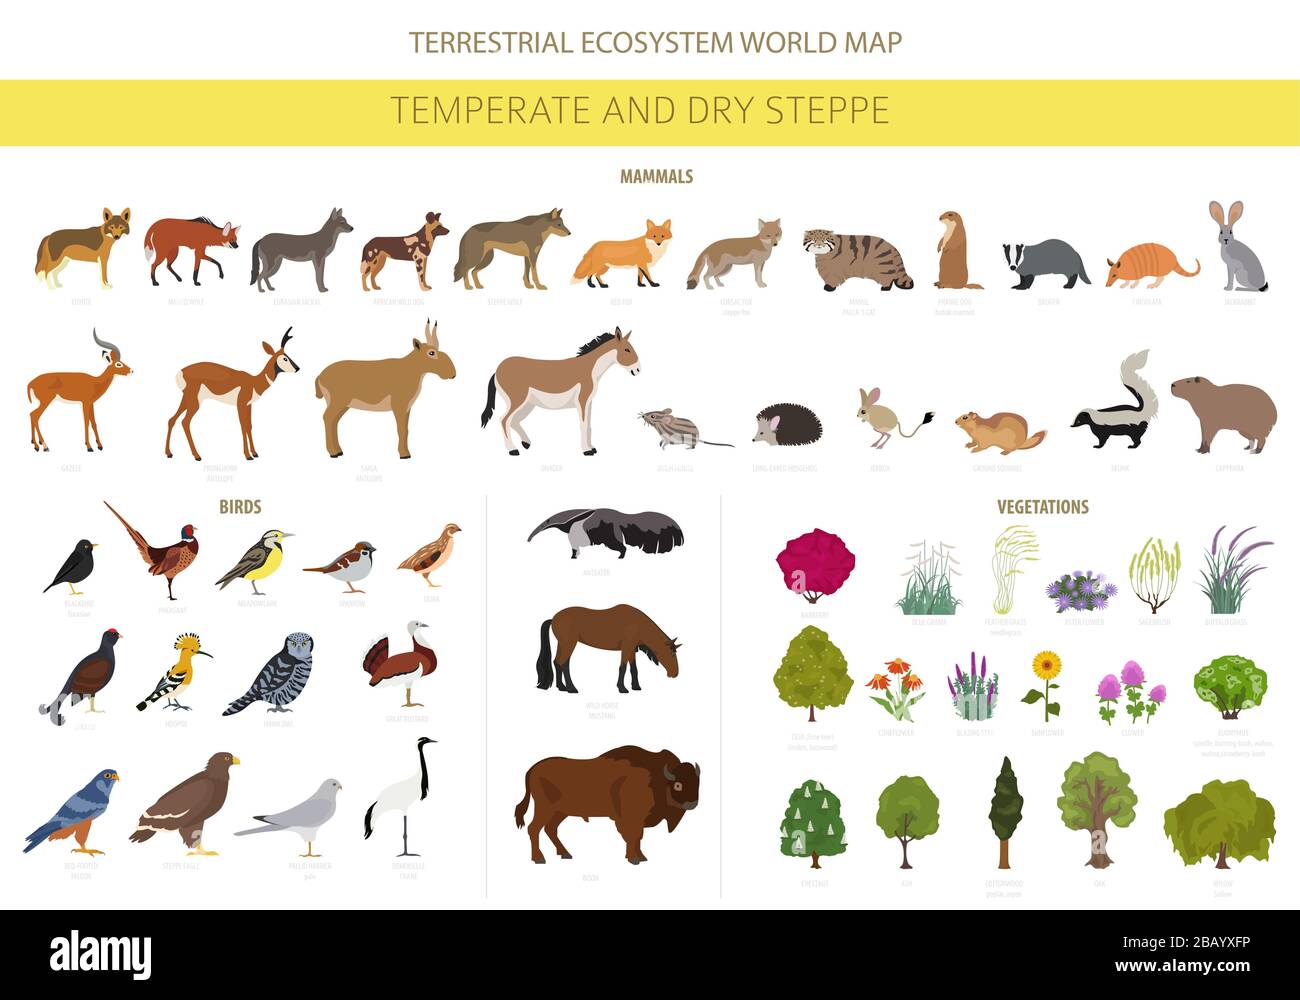 Temperate and dry steppe biome, natural region infographic. Prarie, steppe,  grassland, pampas. Terrestrial ecosystem world map. Animals, birds and veg  Stock Vector Image & Art - Alamy